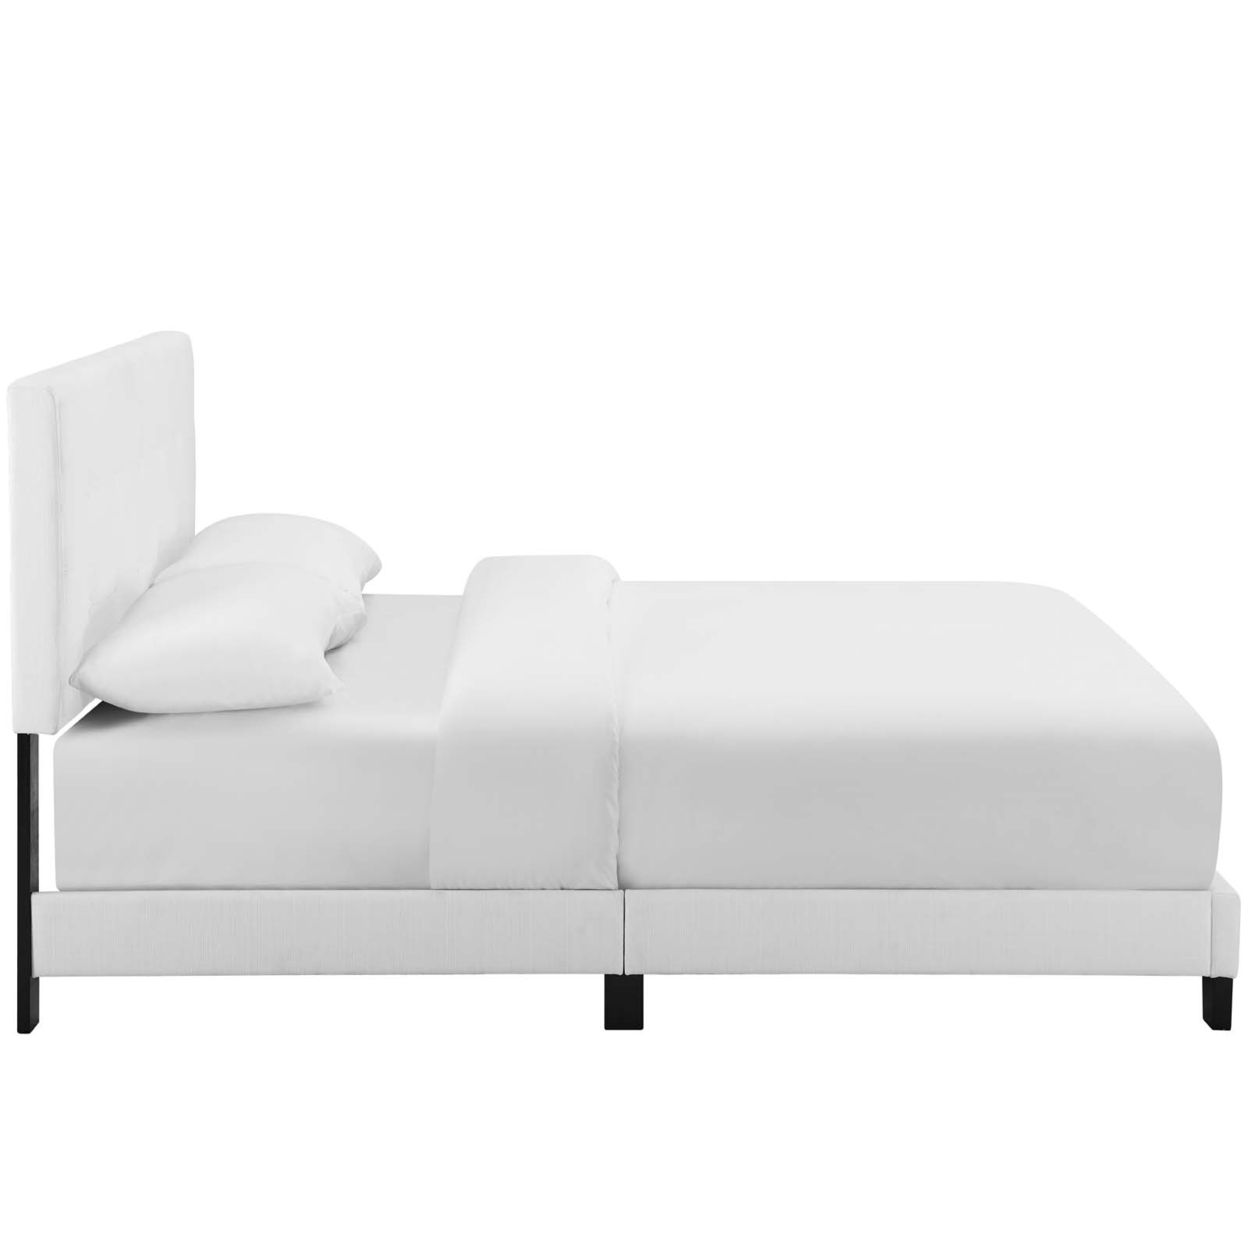 Melanie King Tufted Button Upholstered Fabric Platform Bed, White